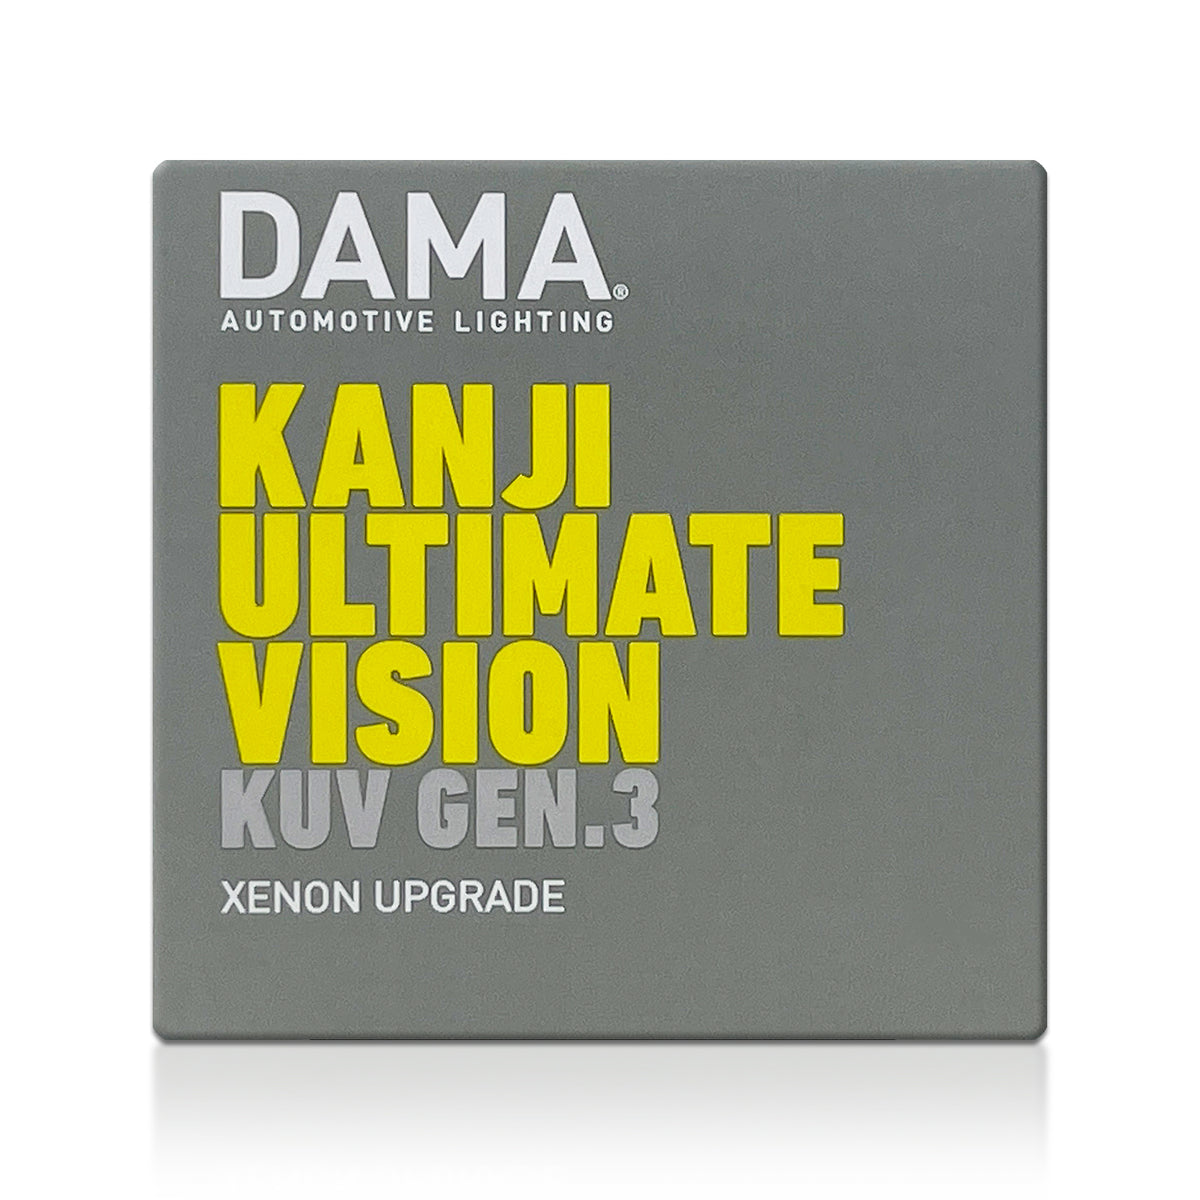 Shop D1S: Dama Kanji Ultimate Vision Gen3 KUV 6000K LED Bulbs  Pack of 2  DAMA Online, Stores . Find the latest styles and brands on the internet  today